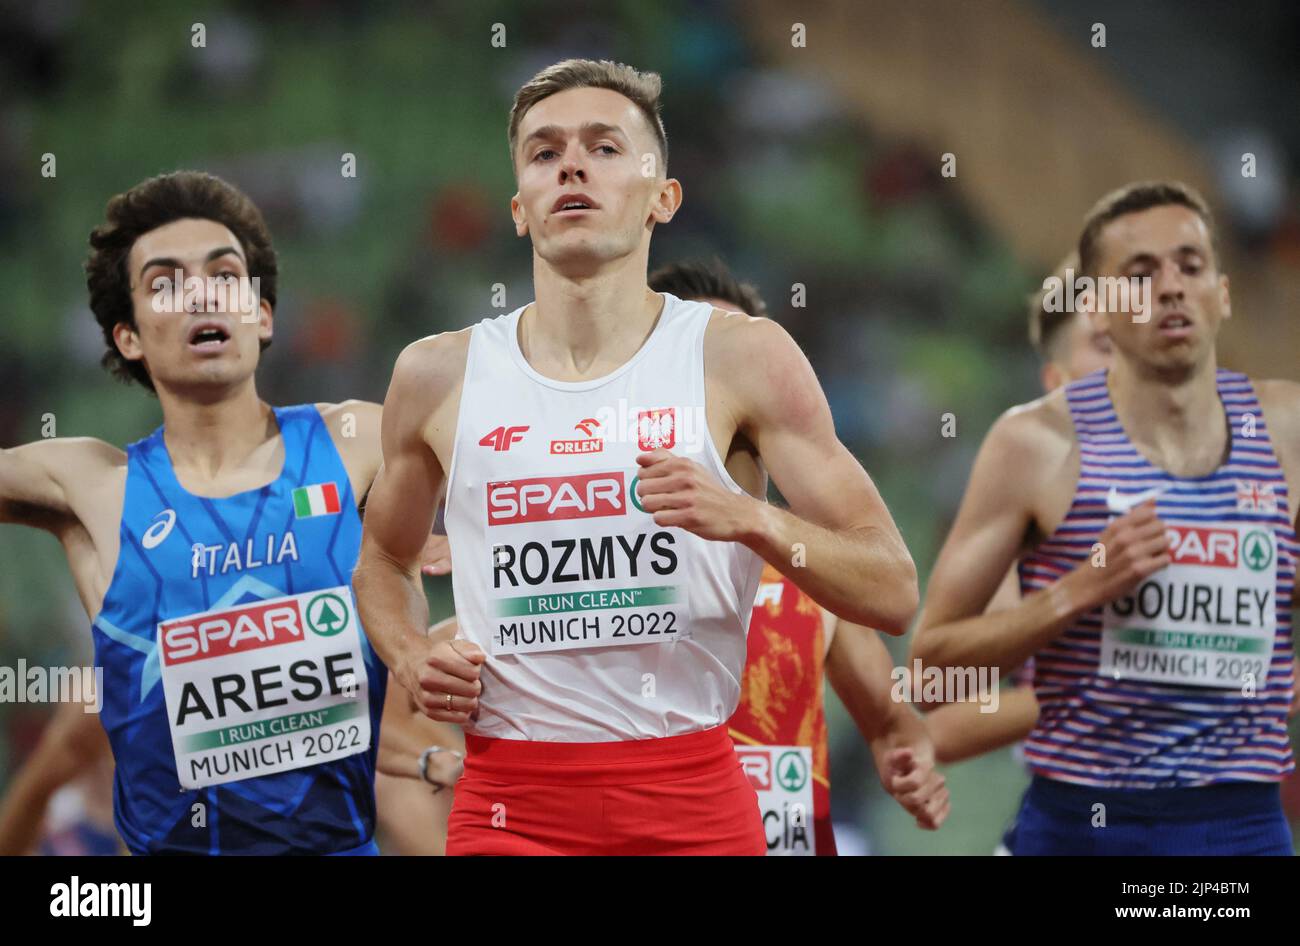 Athletics - 2022 European Championships - Olympiastadion, Munich, Germany - August 15, 2022  Poland's Michal Rozmys crosses the line to win the men's 1500 metres heat 2 ahead of second place Italy's Pietro Arese REUTERS/Wolfgang Rattay Stock Photo